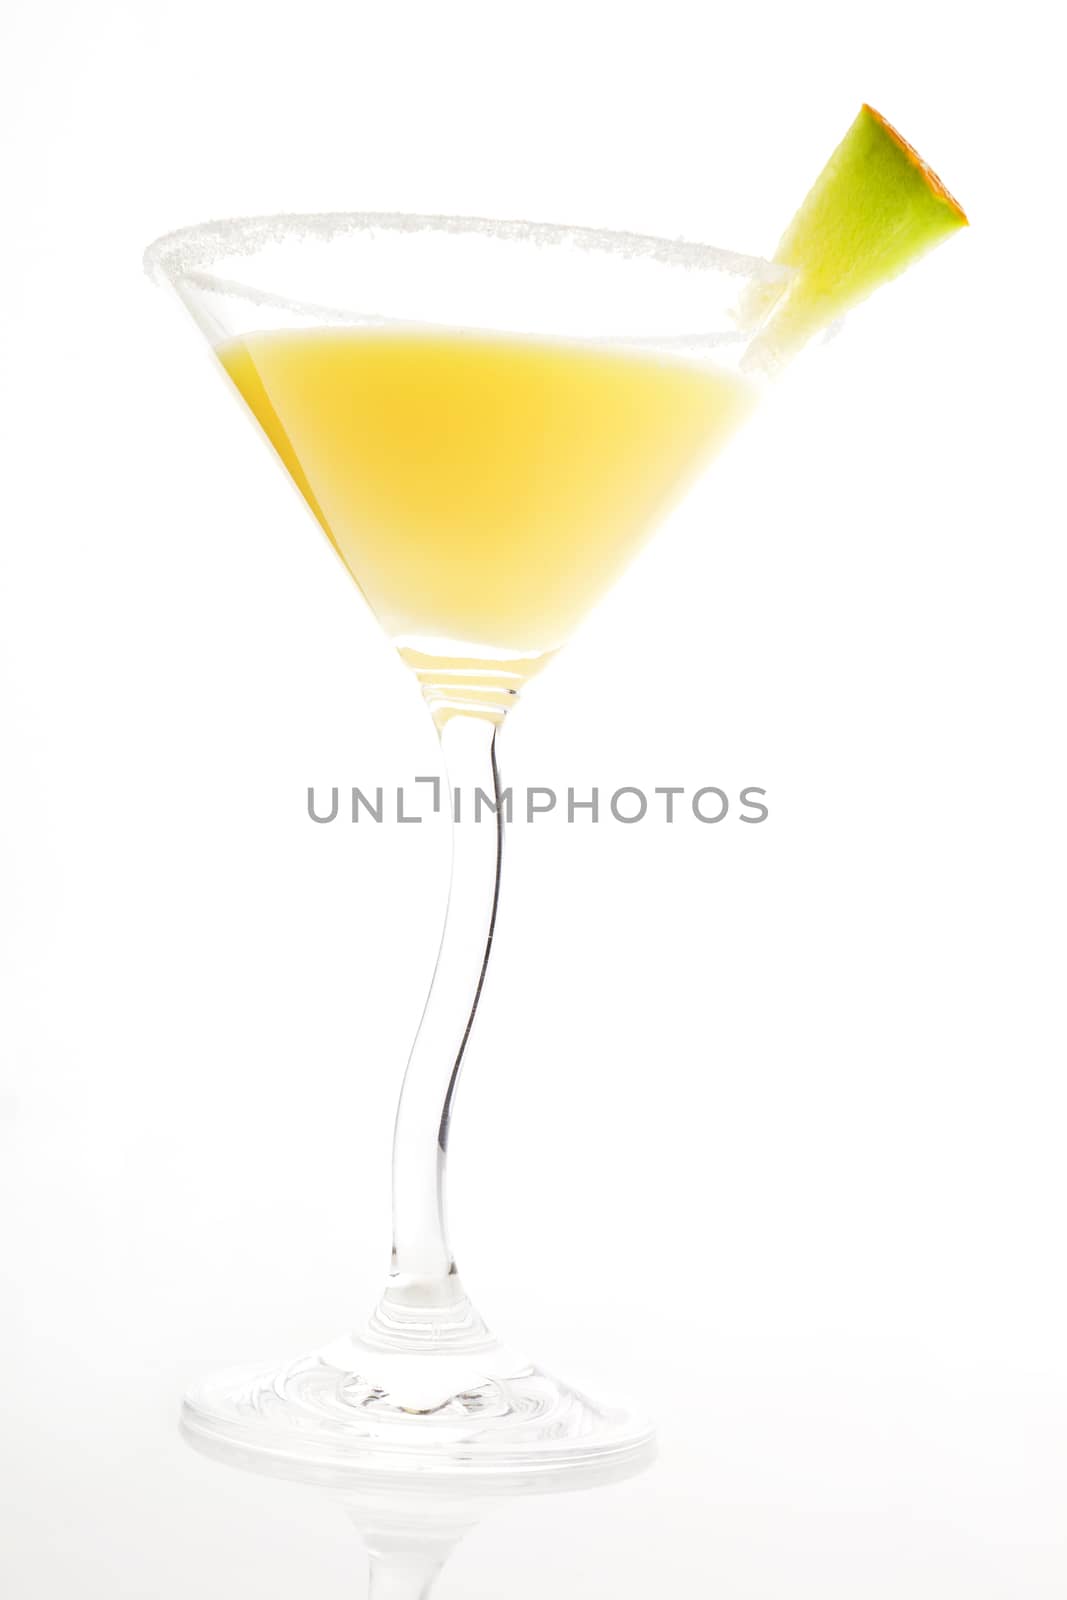 Luxurious yellow cocktail with melon garnish isolated on white background.